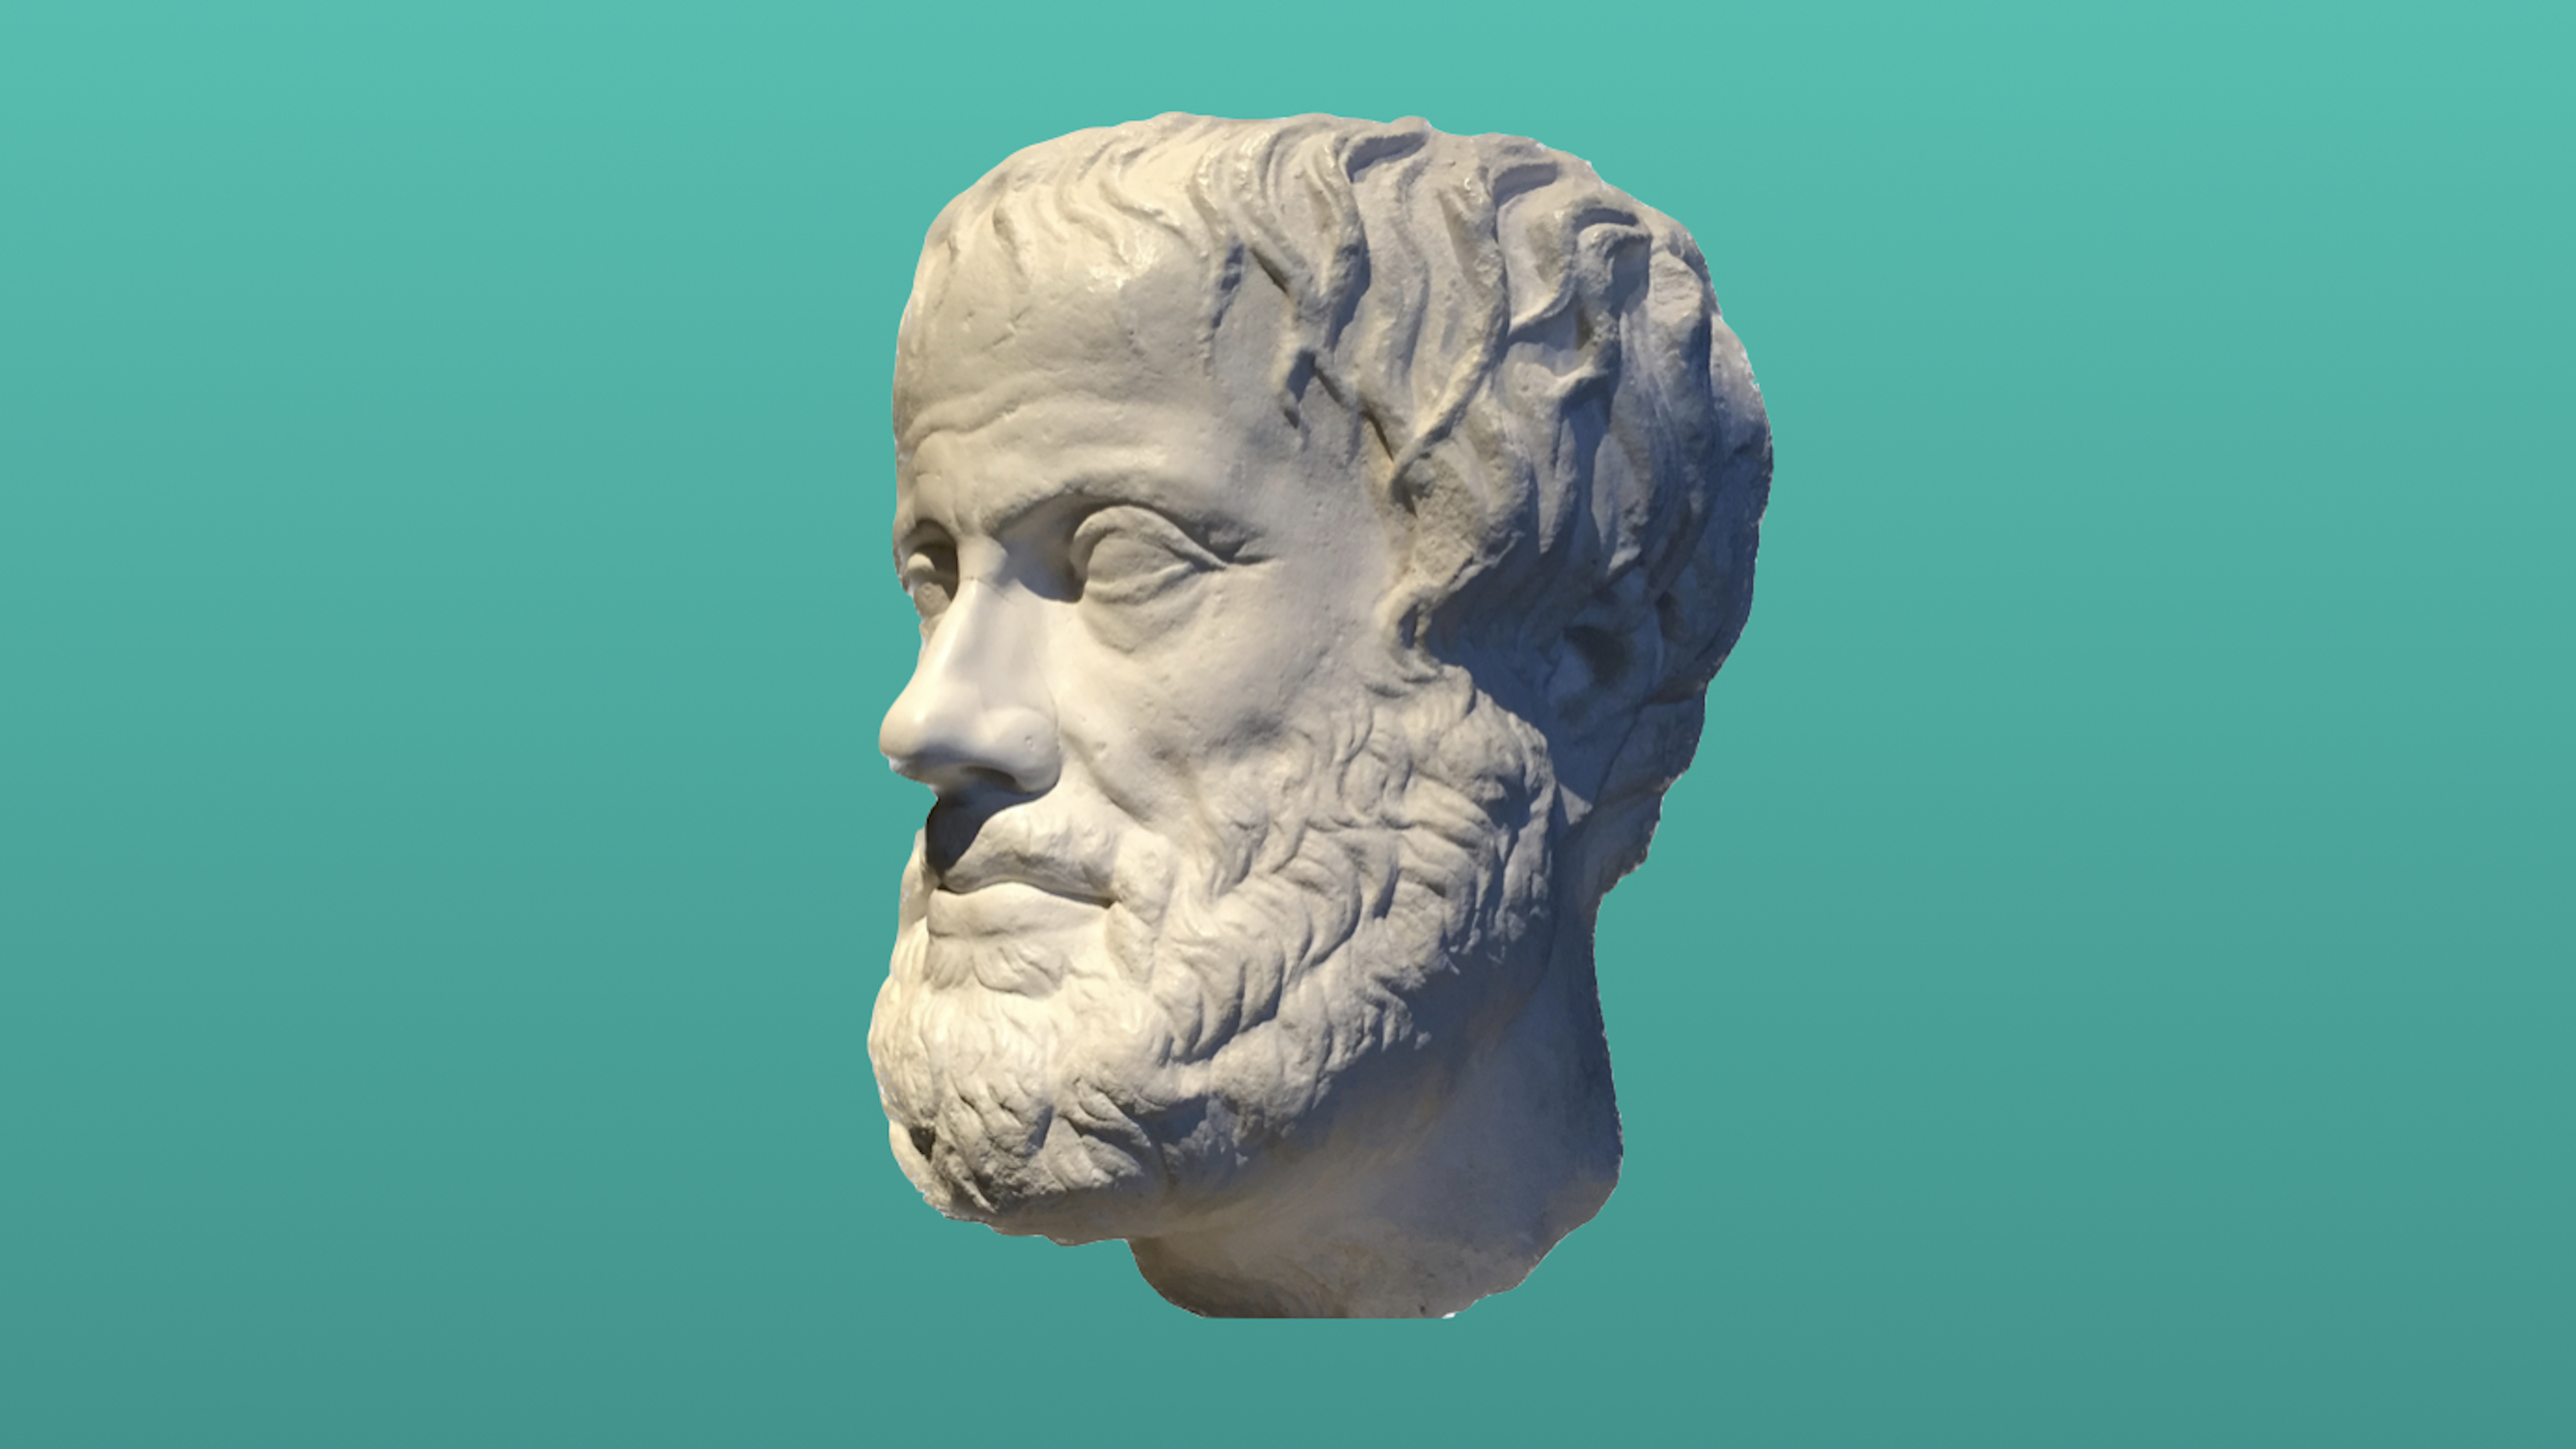 Ancient bust of a bearded man, believed to depict one of history's generous leaders, with detailed facial features, set against a plain turquoise background.